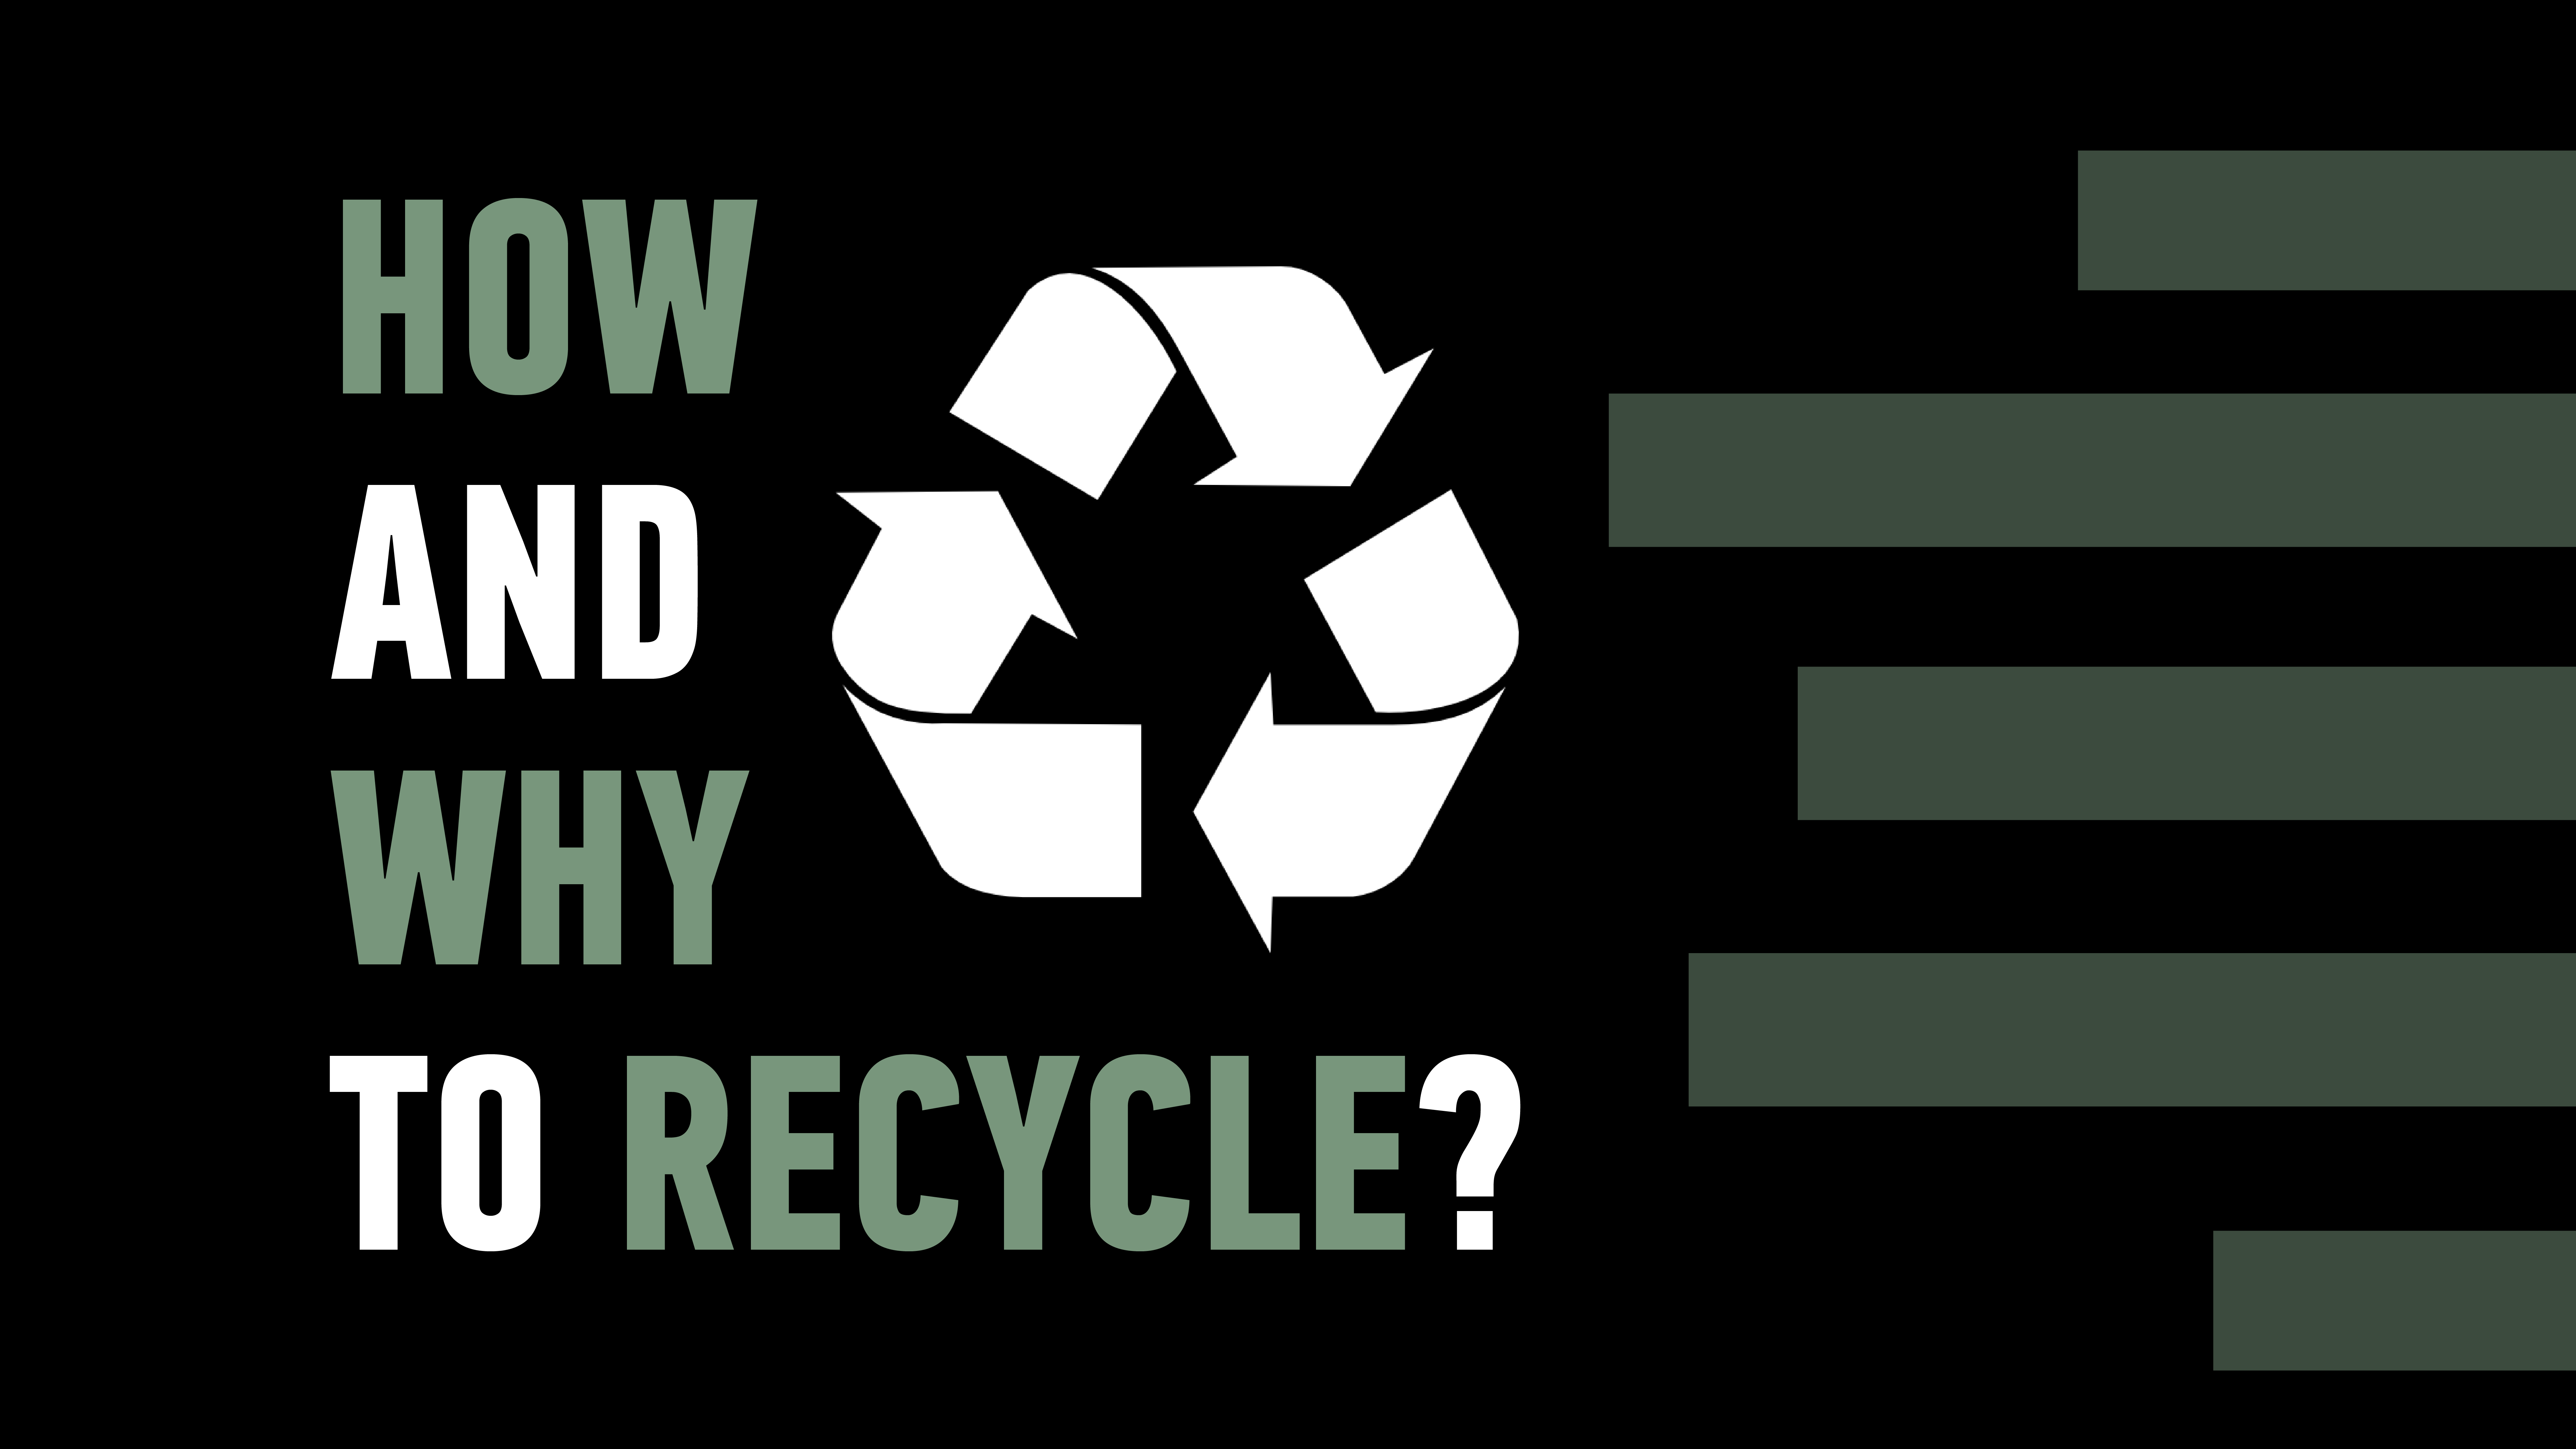 How and Why to Recycle? // Lecture & activities